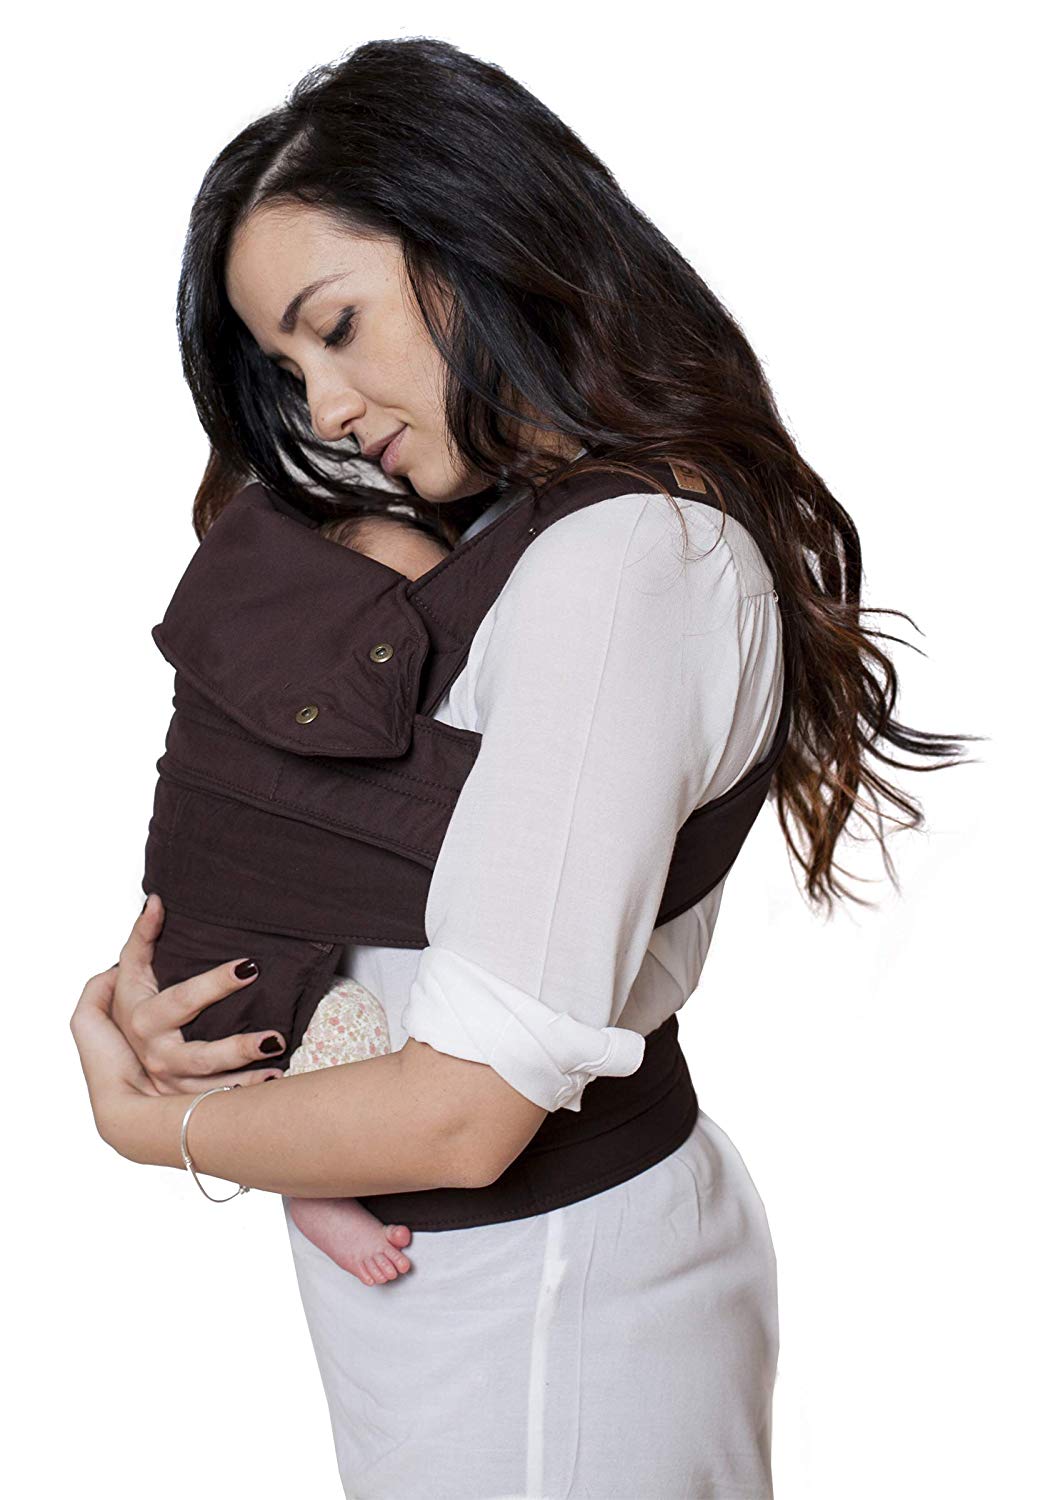 V baby carrier. Classic xl